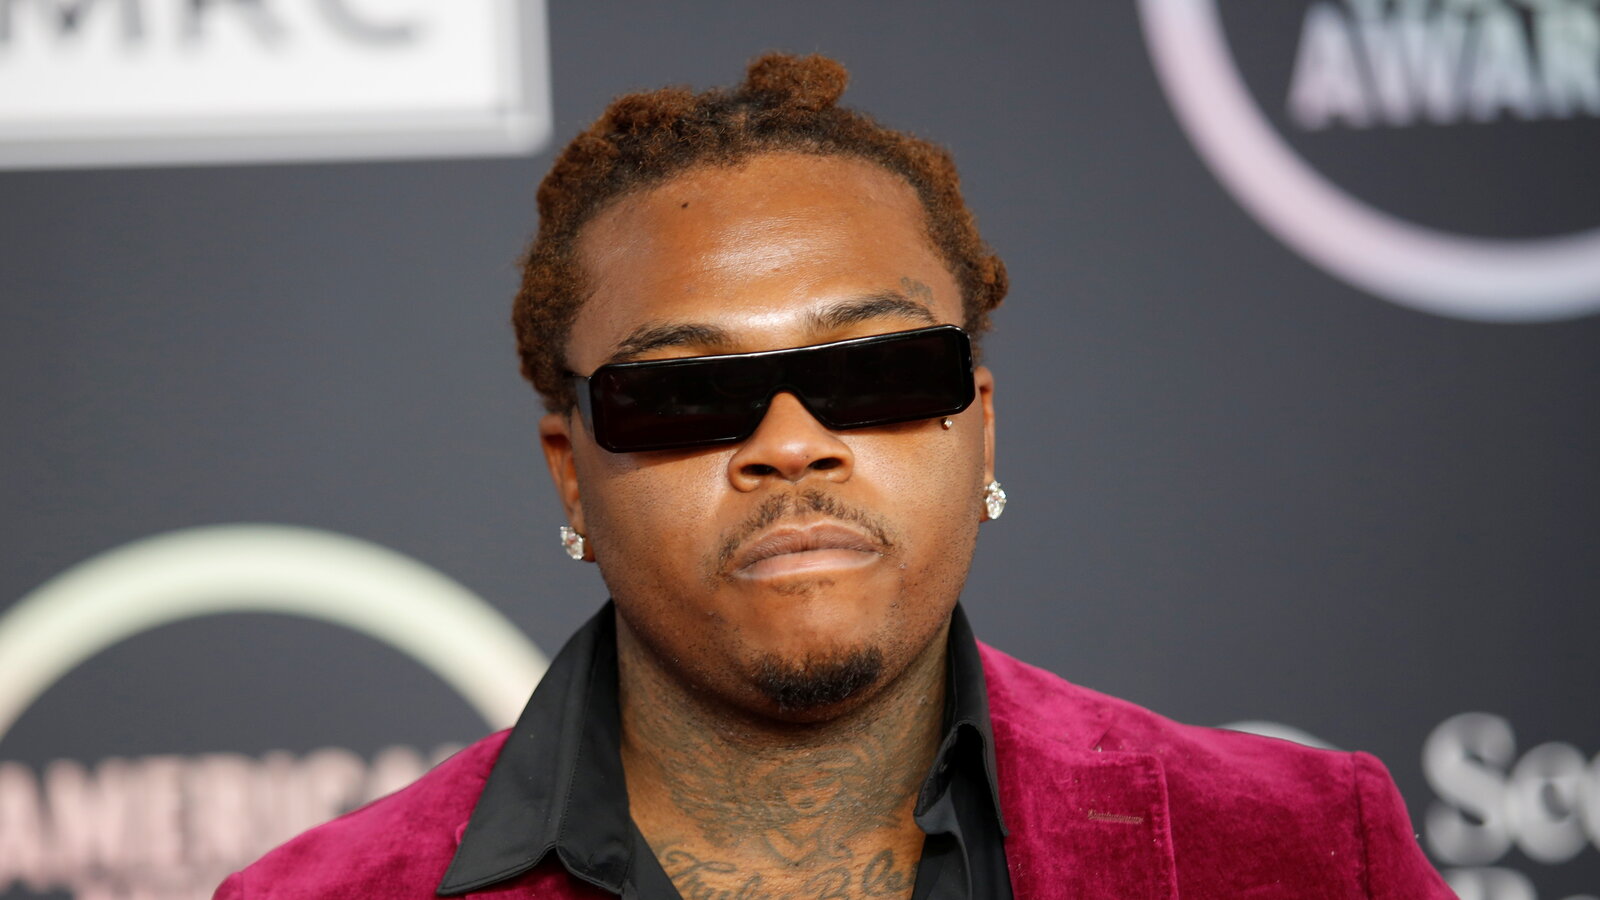 Gunna Has a Chance to Define the Sound of 2019  GQ